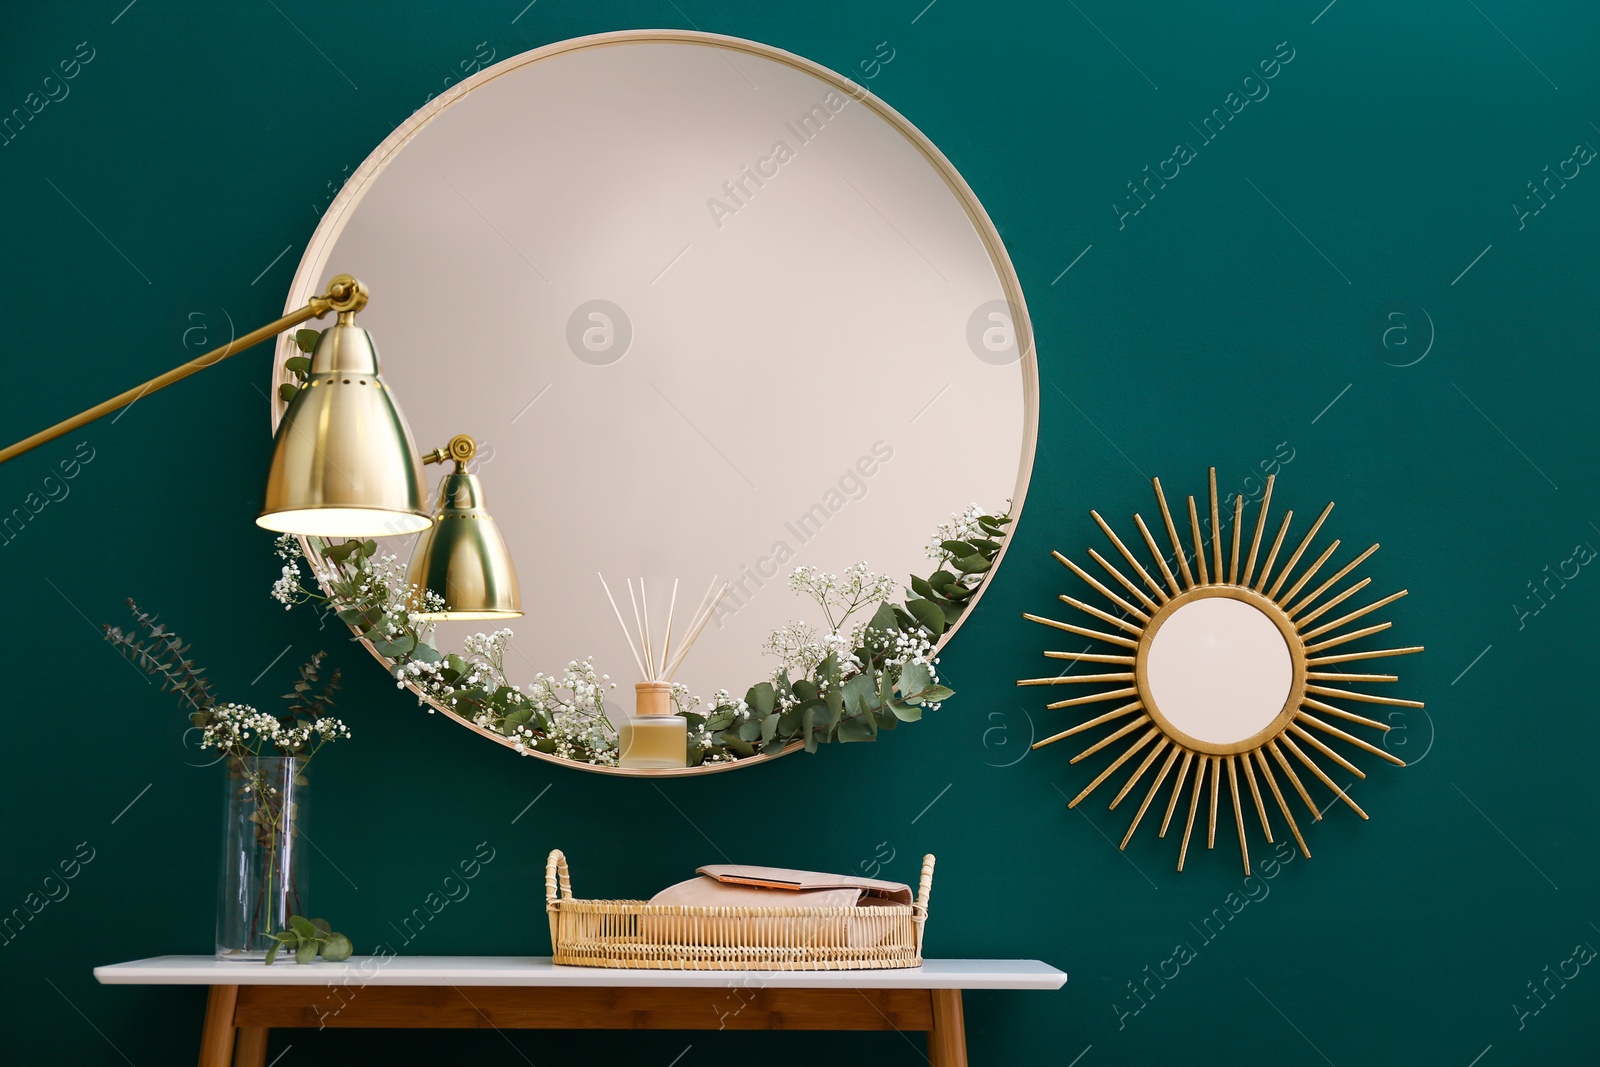 Photo of Round mirror and table with accessories near green wall in modern room interior